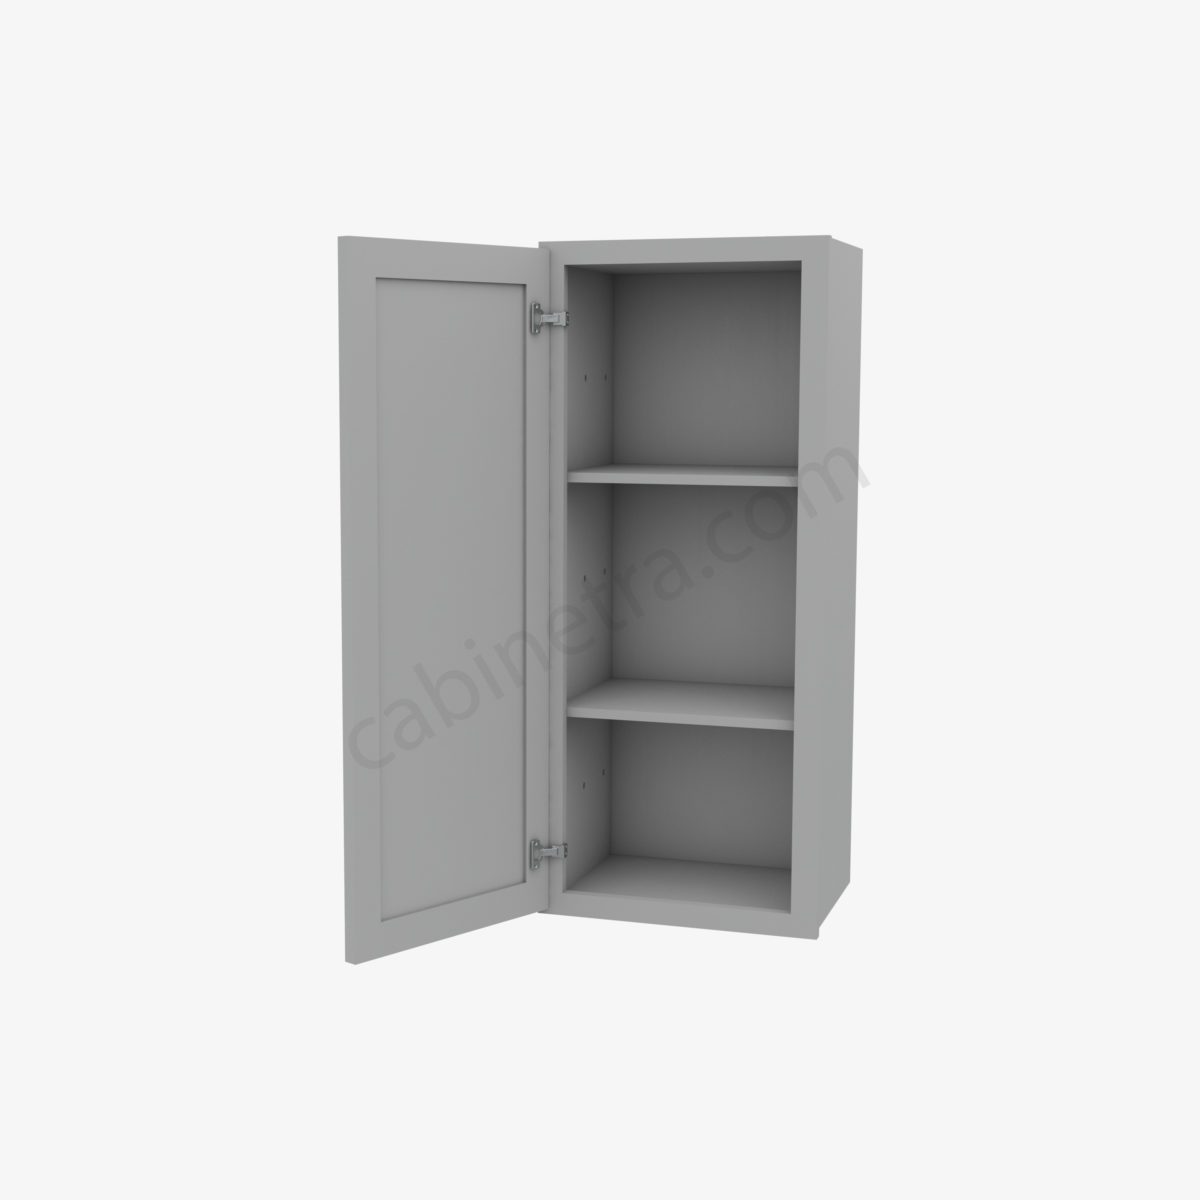 AB W1536 5 Forevermark Lait Gray Shaker Cabinetra scaled